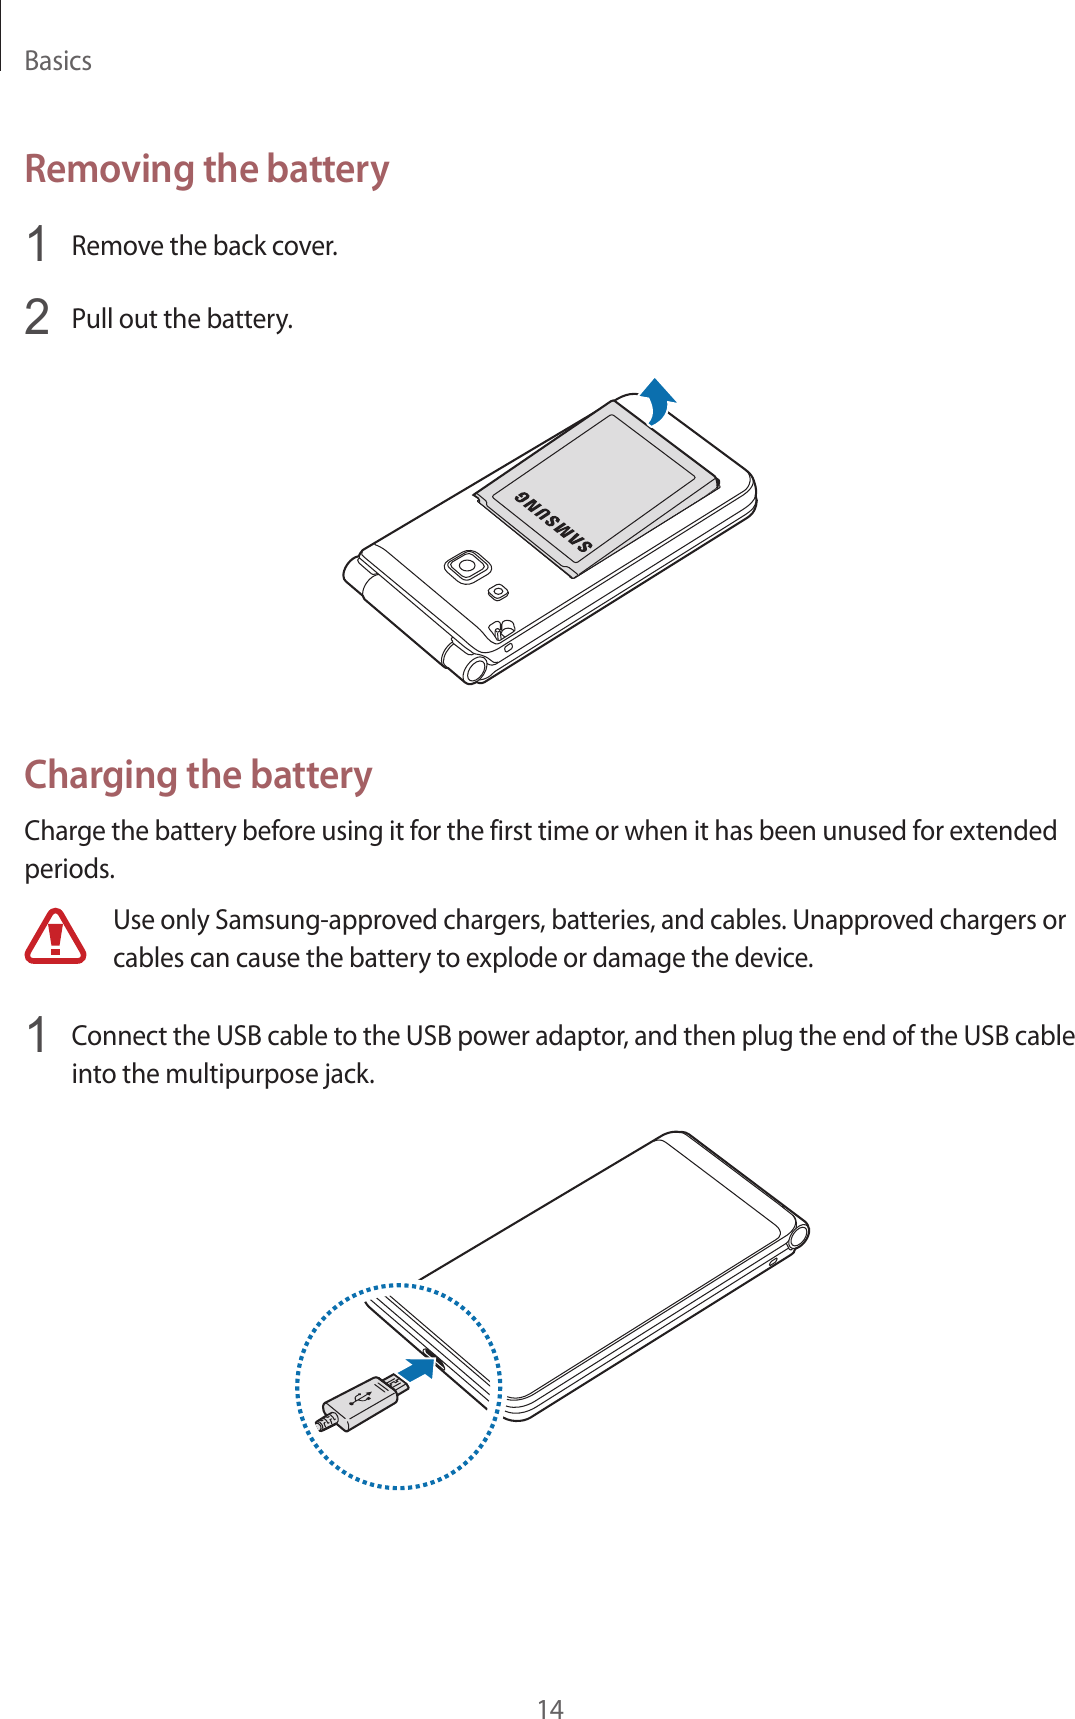 Basics14Removing the battery1  Remove the back cover.2  Pull out the battery.Charging the batteryCharge the battery before using it for the first time or when it has been unused for extended periods.Use only Samsung-approved chargers, batteries, and cables. Unapproved chargers or cables can cause the battery to explode or damage the device.1  Connect the USB cable to the USB power adaptor, and then plug the end of the USB cable into the multipurpose jack.